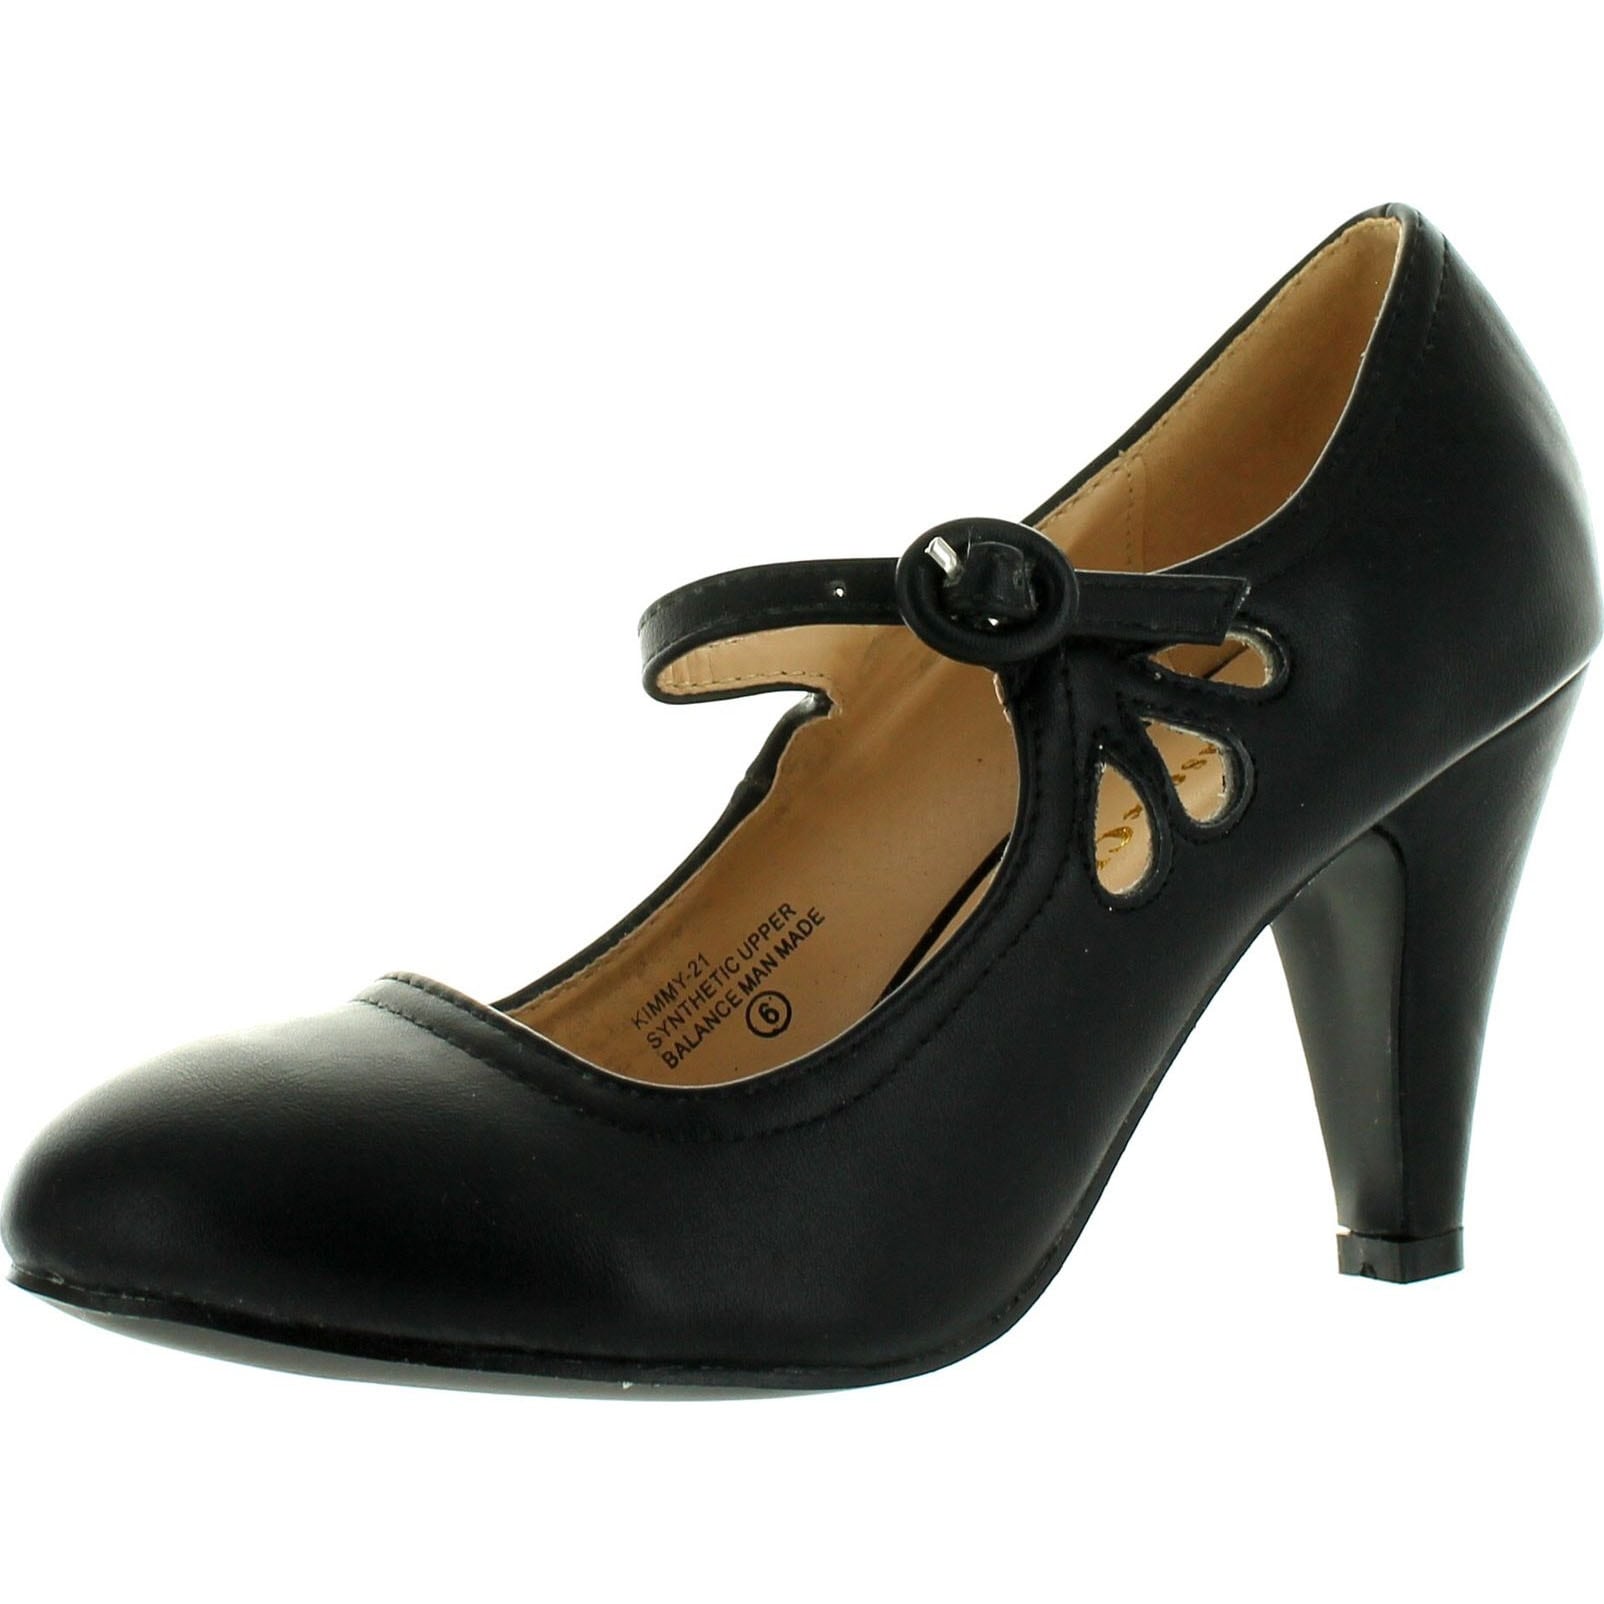 mary jane shoes women